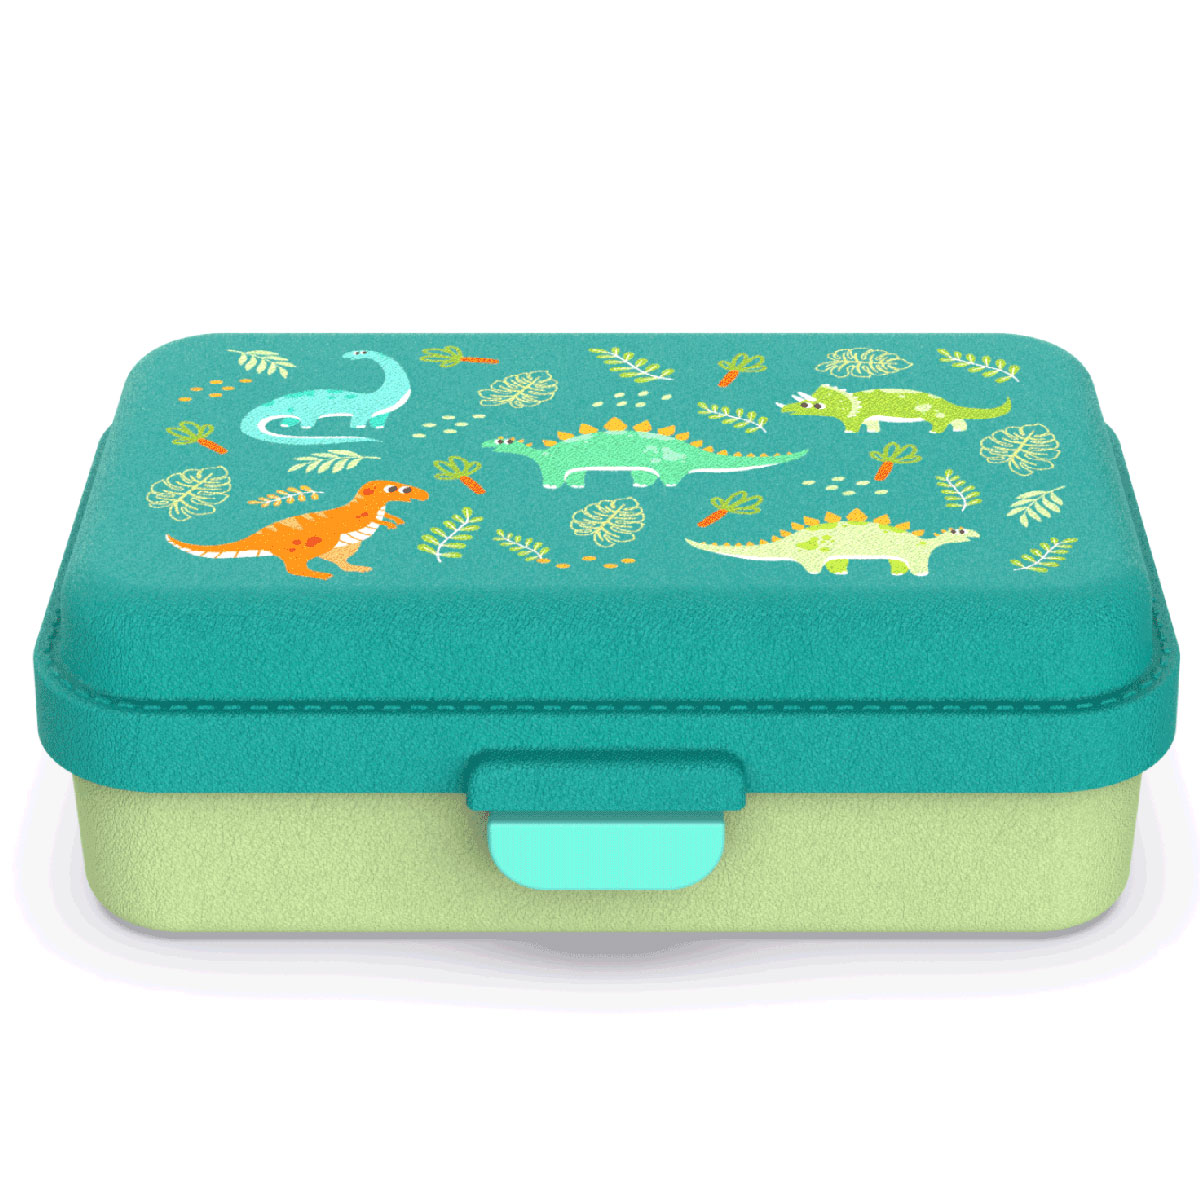 NEW ARRIVAL ice pack customized design 3 ocmpartments kids plastic lunch box with spoon fork